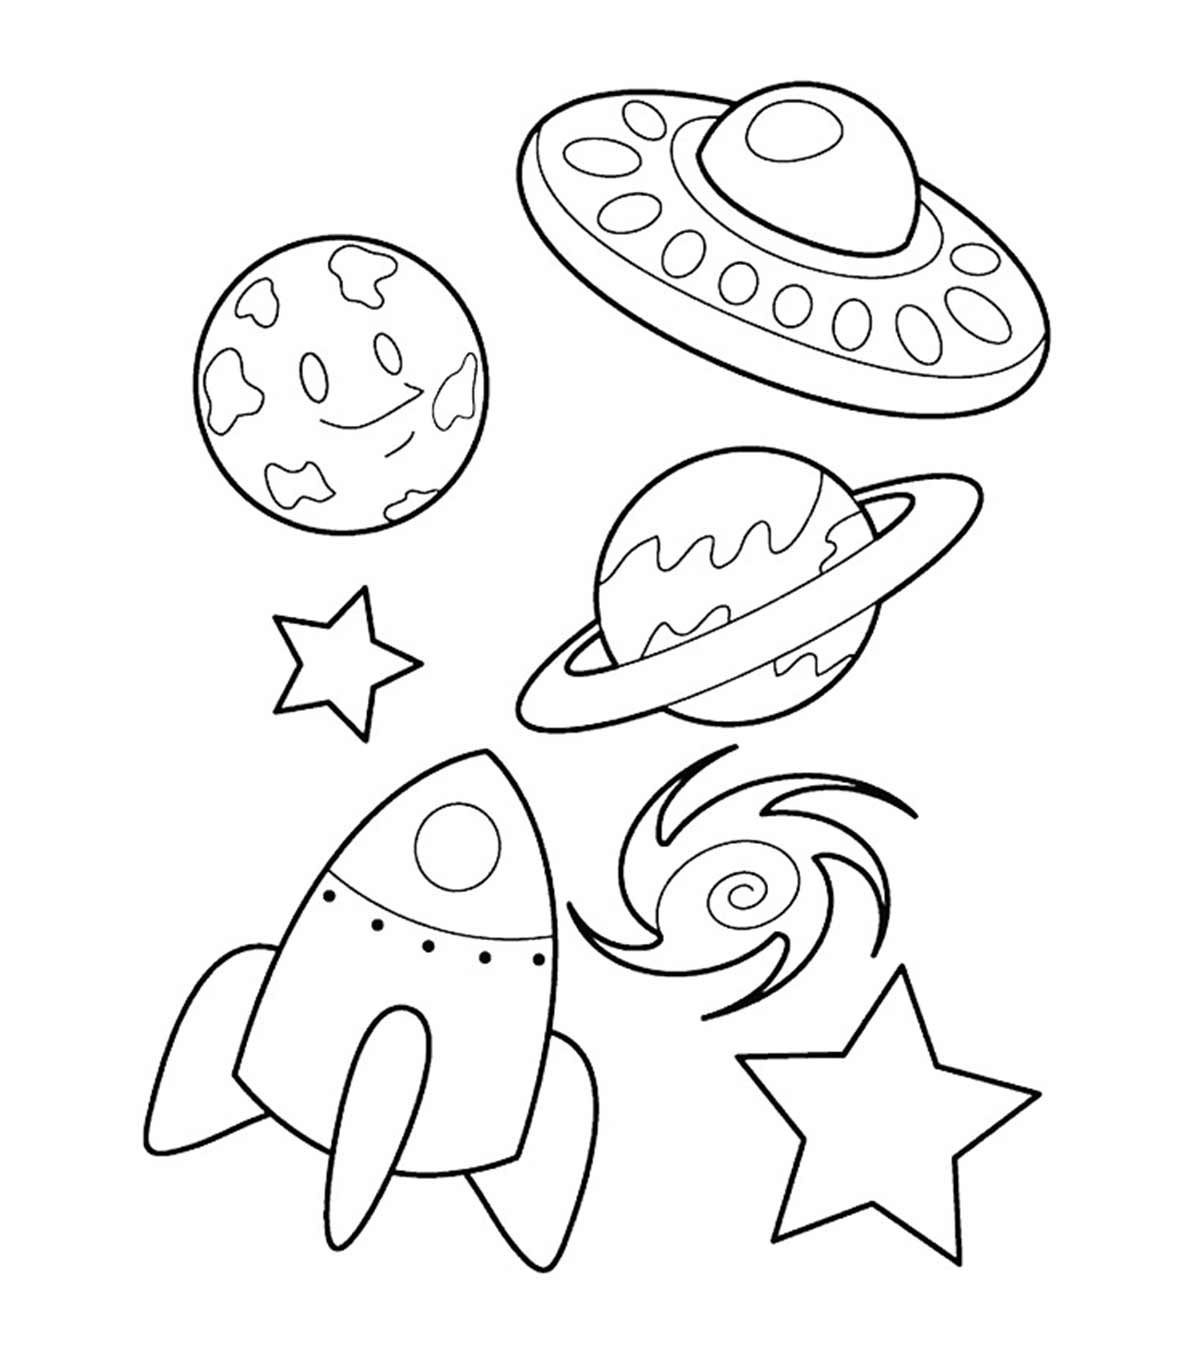 10 Best Spaceship Coloring Pages For Toddlers_image